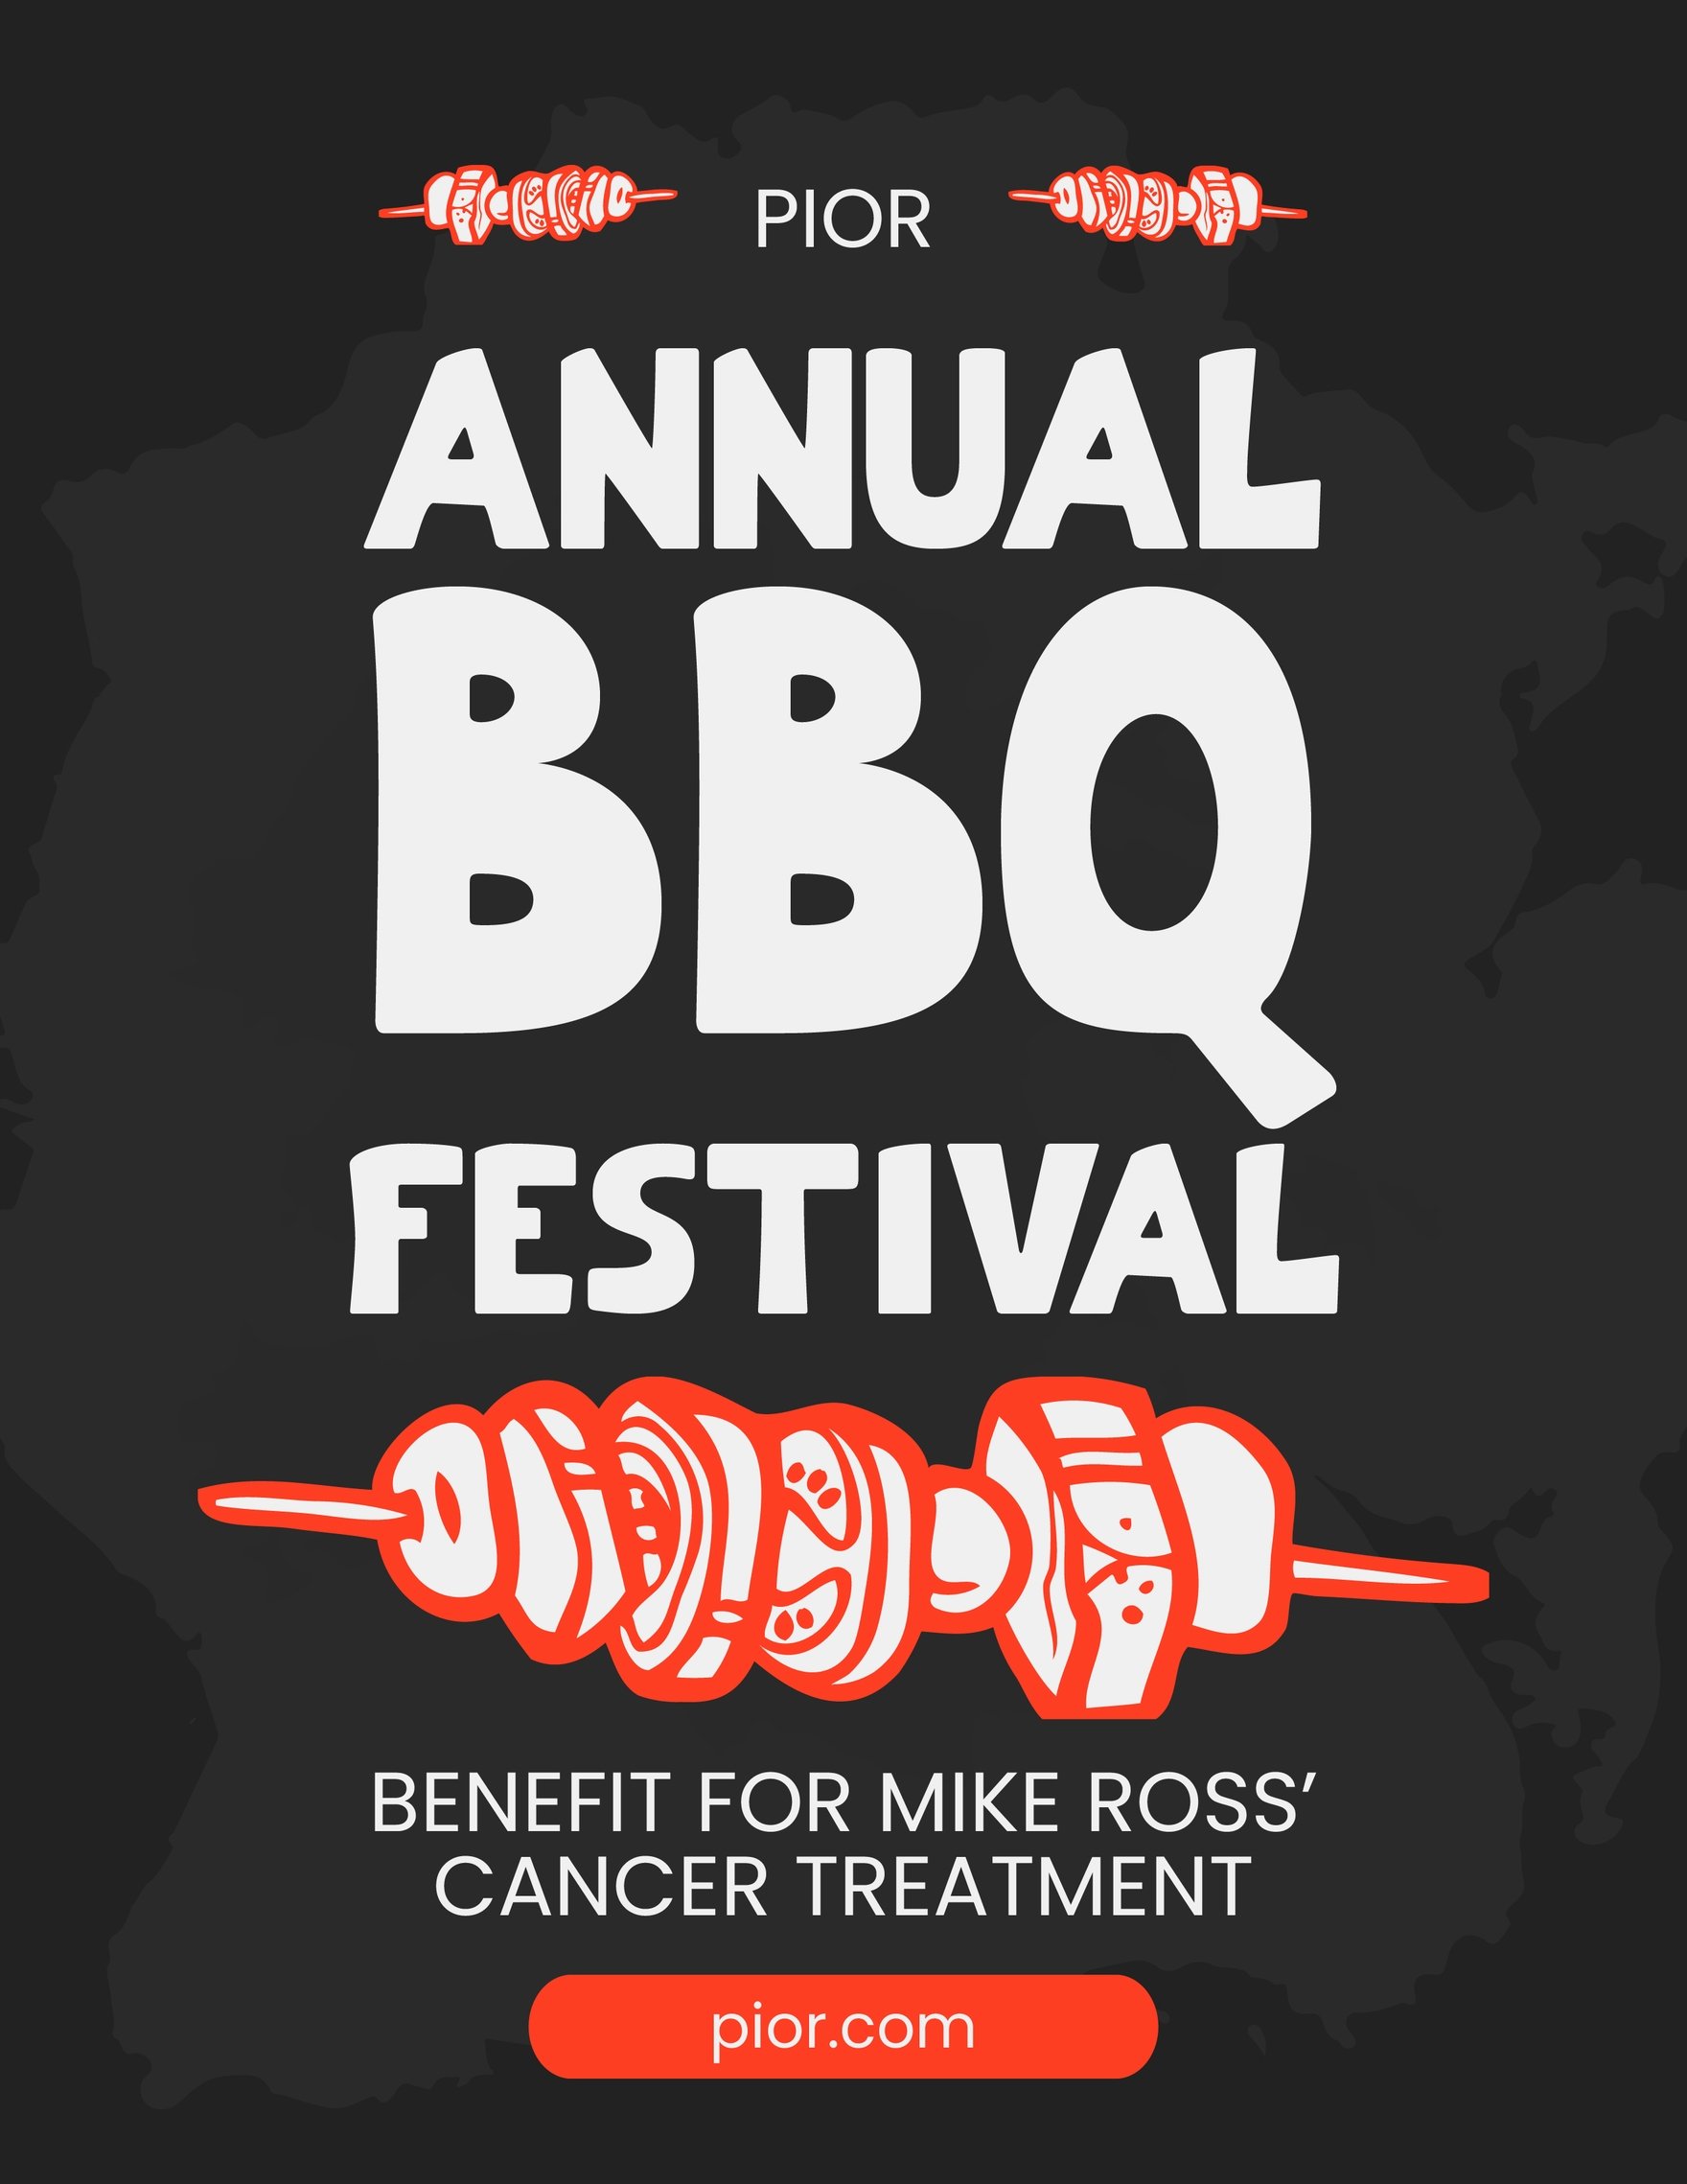 Free BBQ Benefit Flyer in Word, Illustrator, PSD, Apple Pages, Publisher